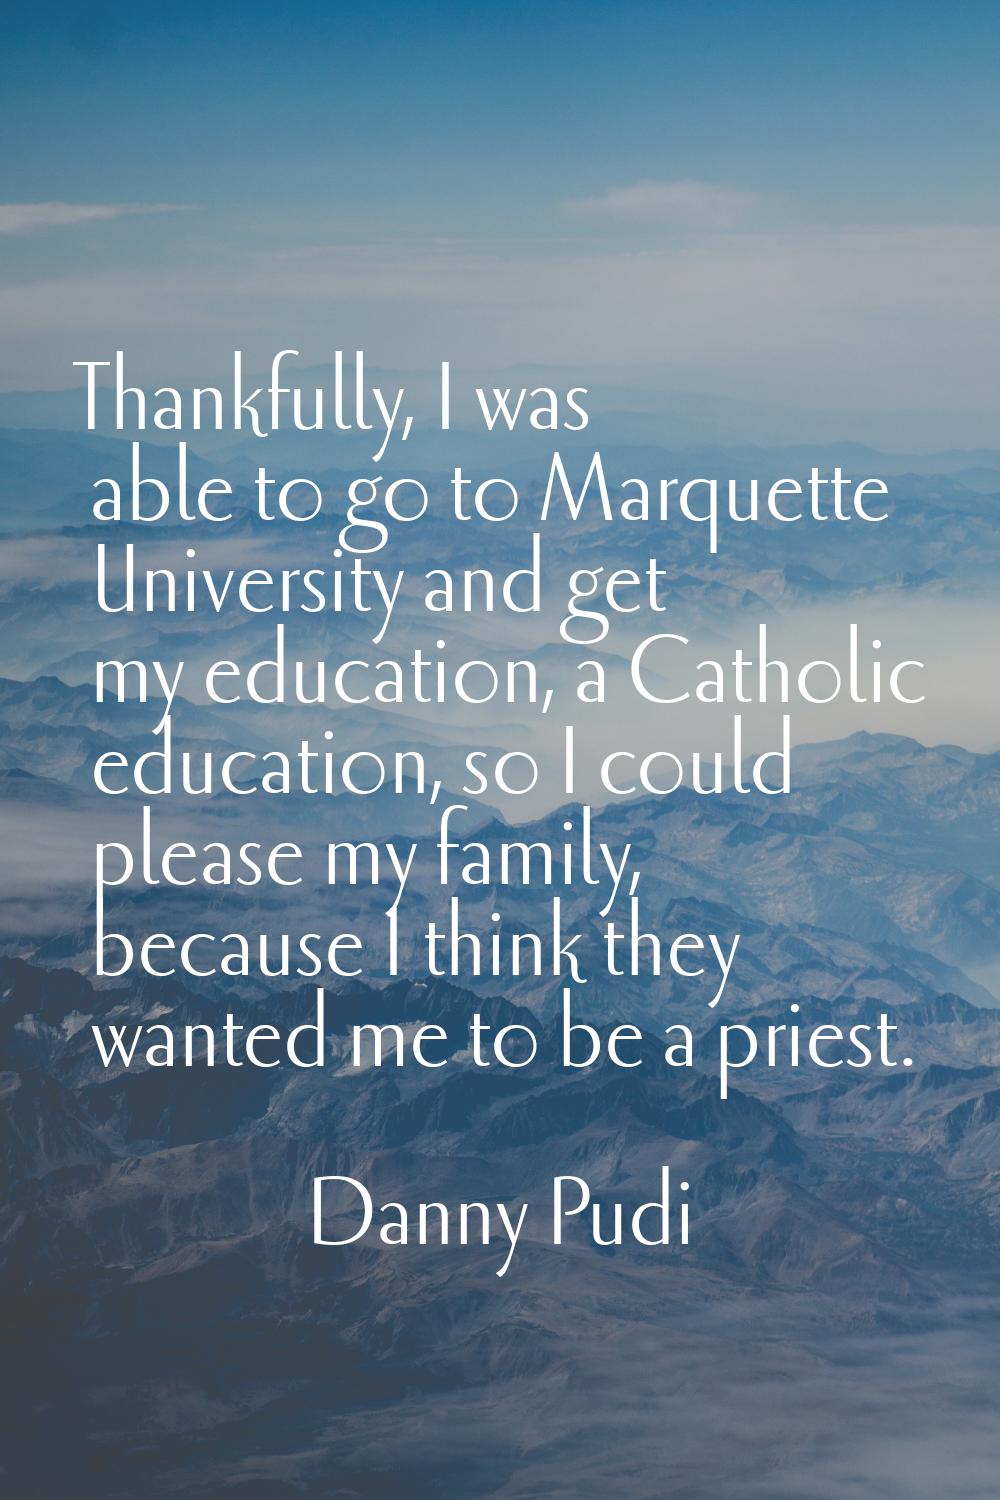 Thankfully, I was able to go to Marquette University and get my education, a Catholic education, so